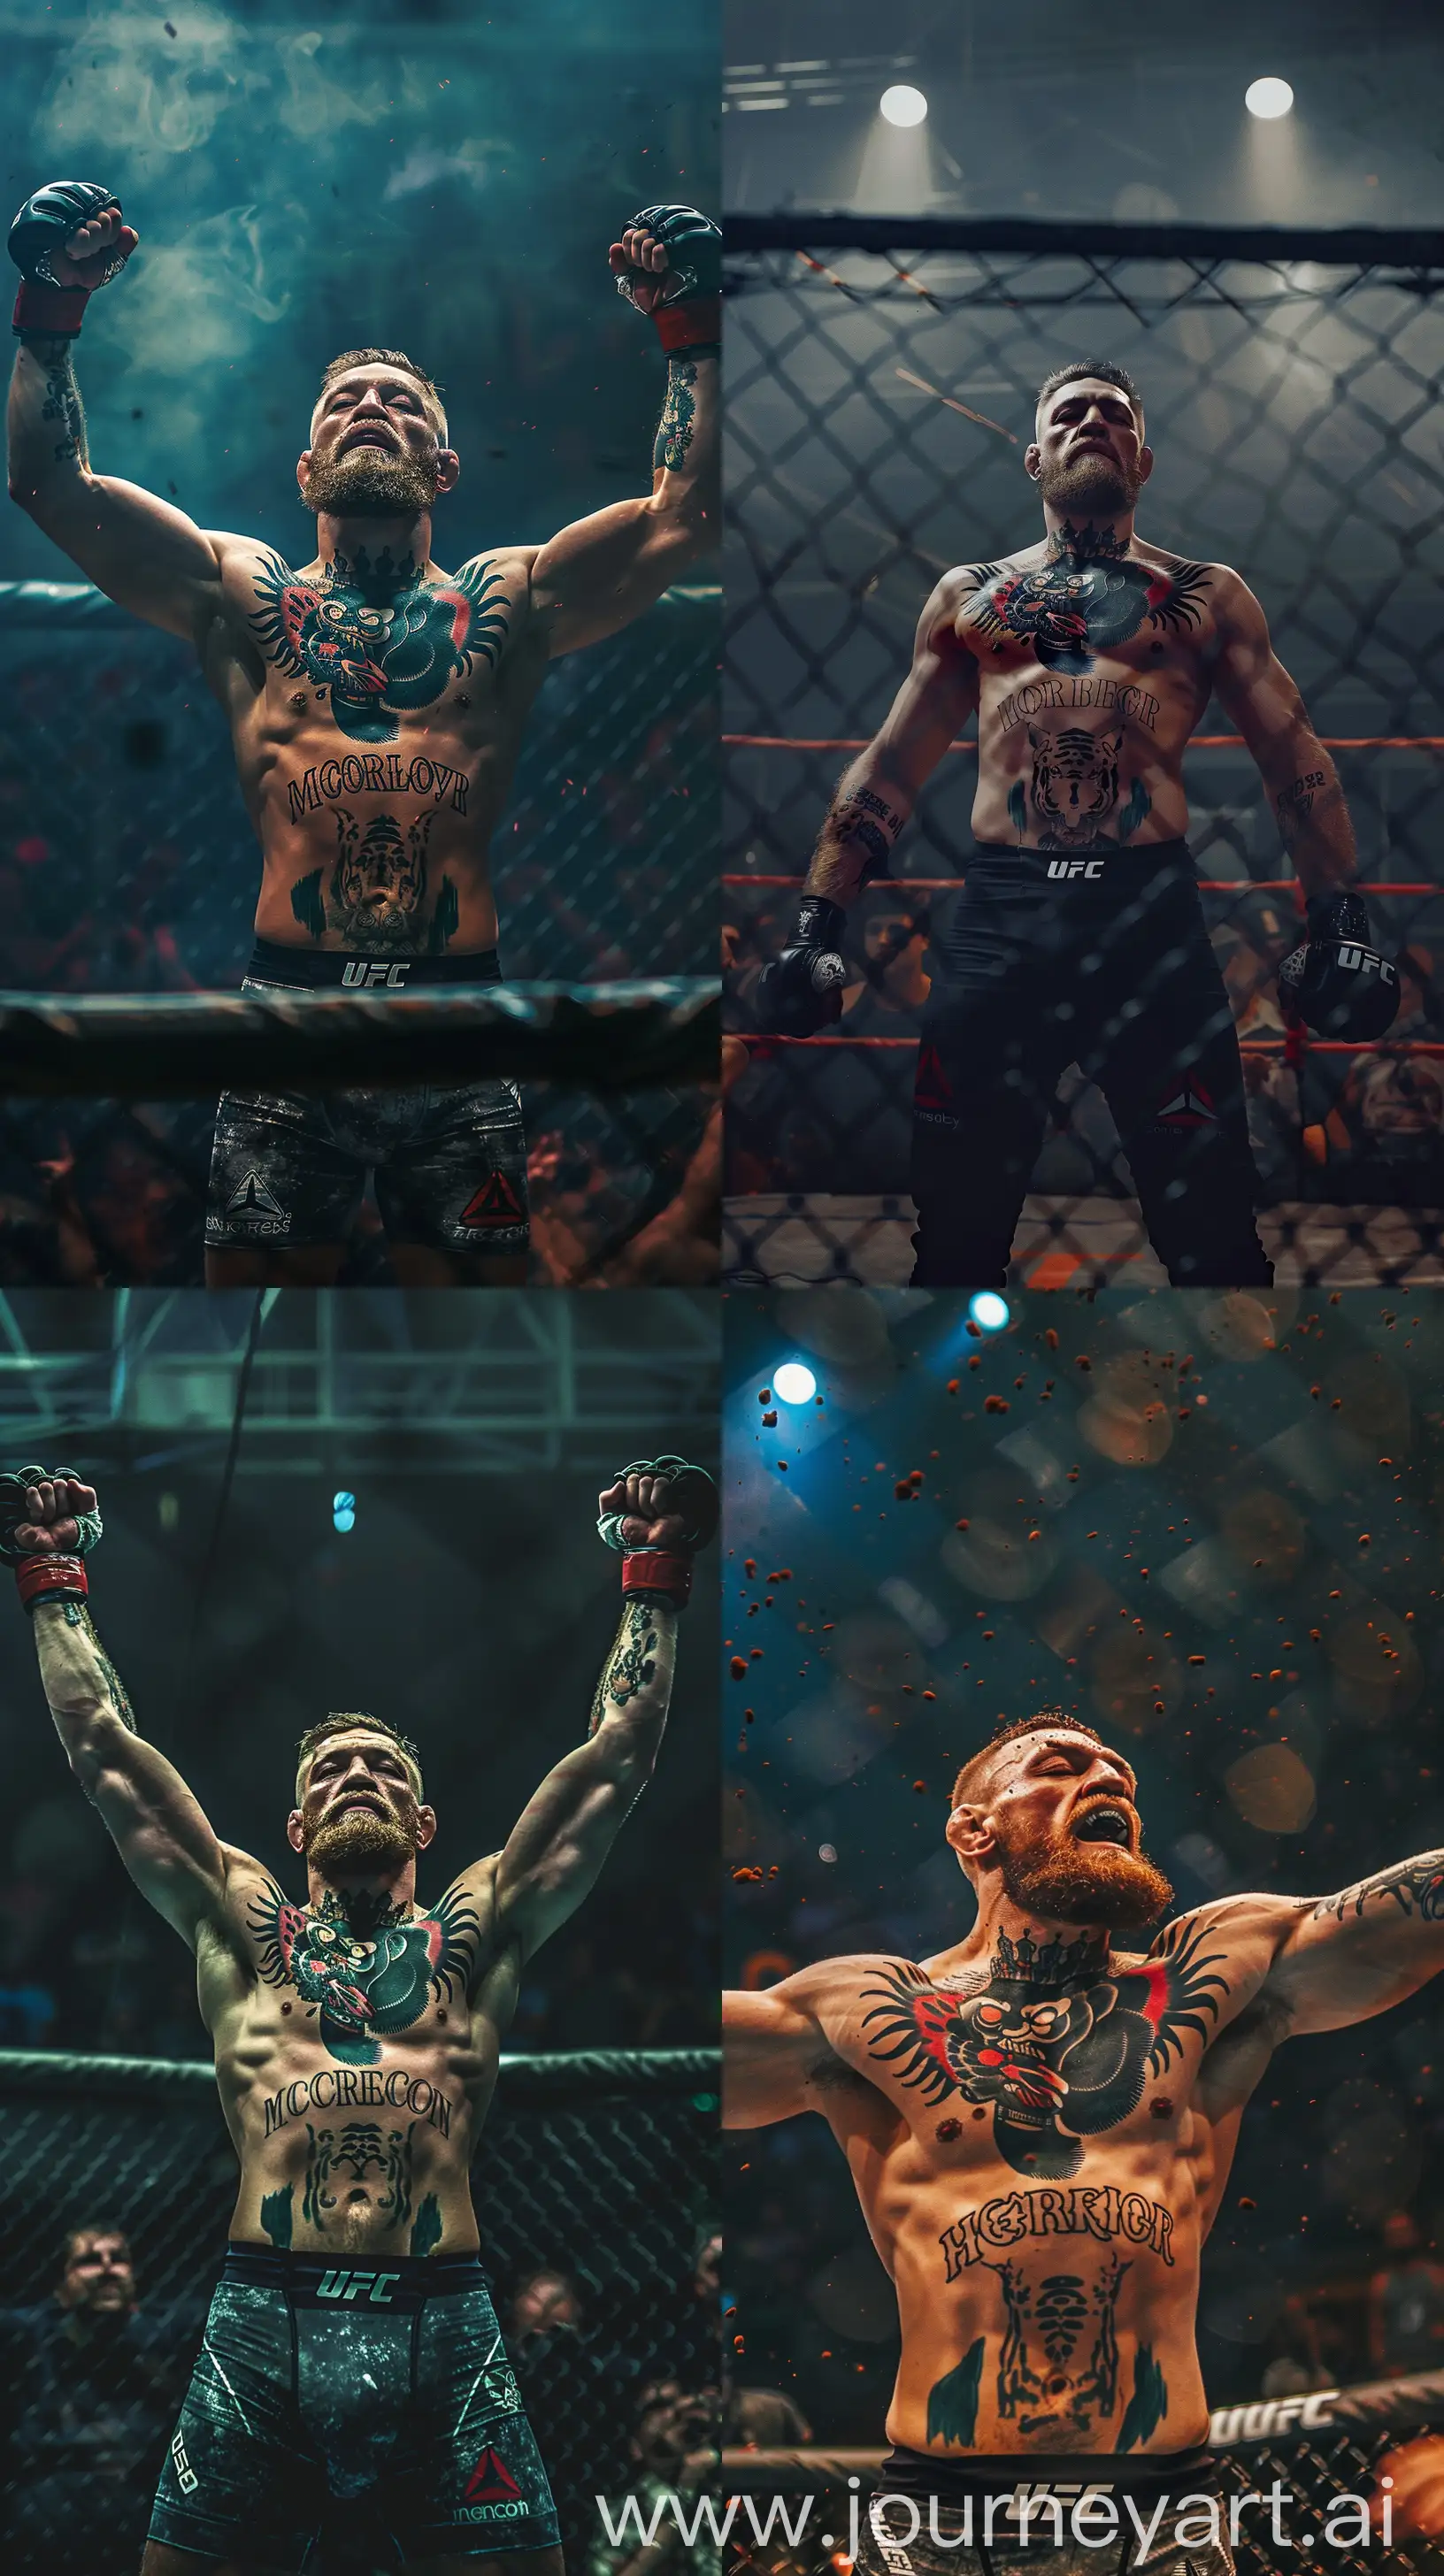 Amit-Thackeray-Triumphs-in-MMA-Ring-with-UFC-Grappling-Gloves